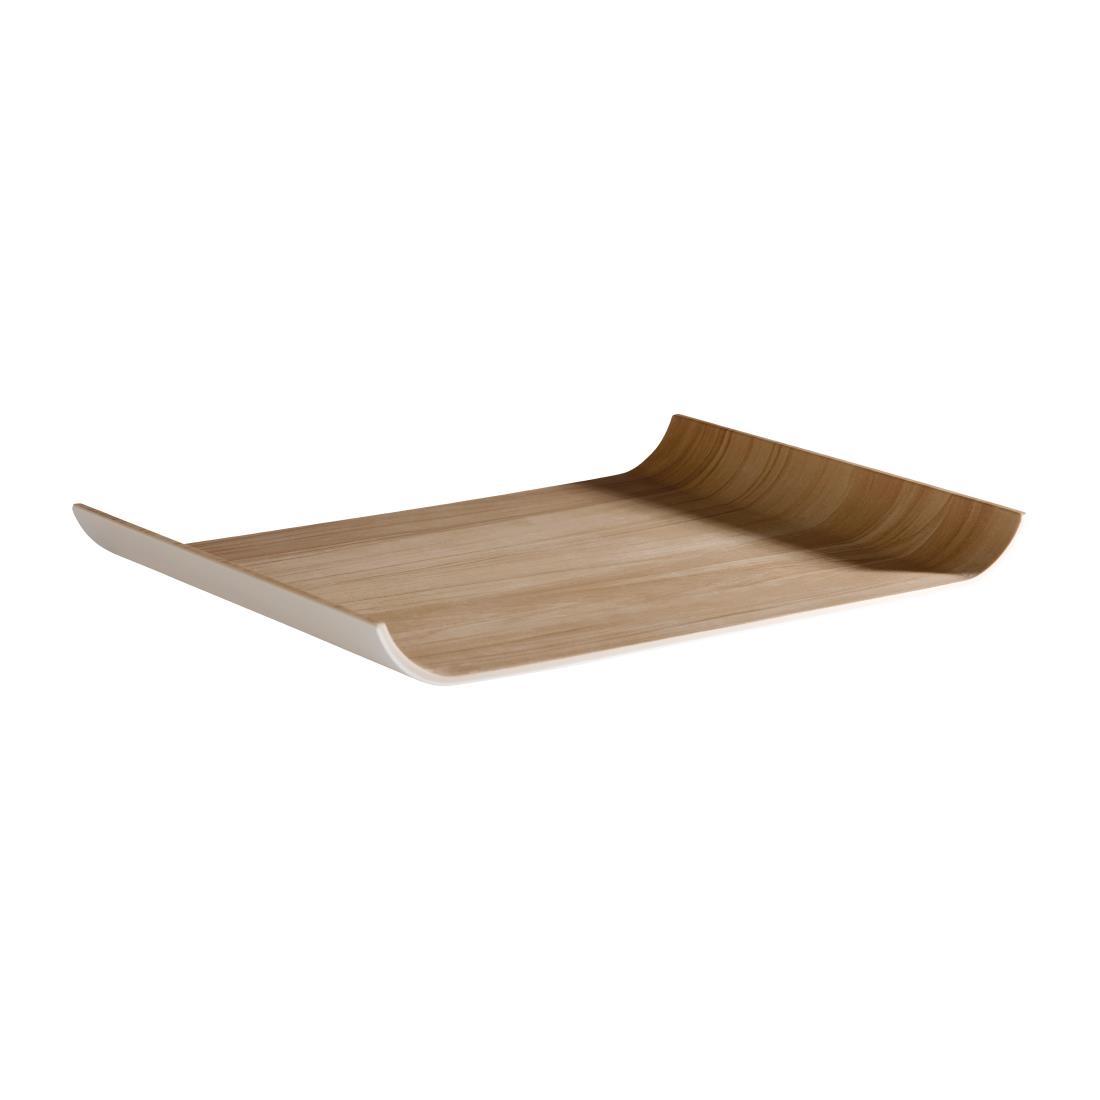 APS Frida Tray Wood and White 355mm - Each - DW043 - 1